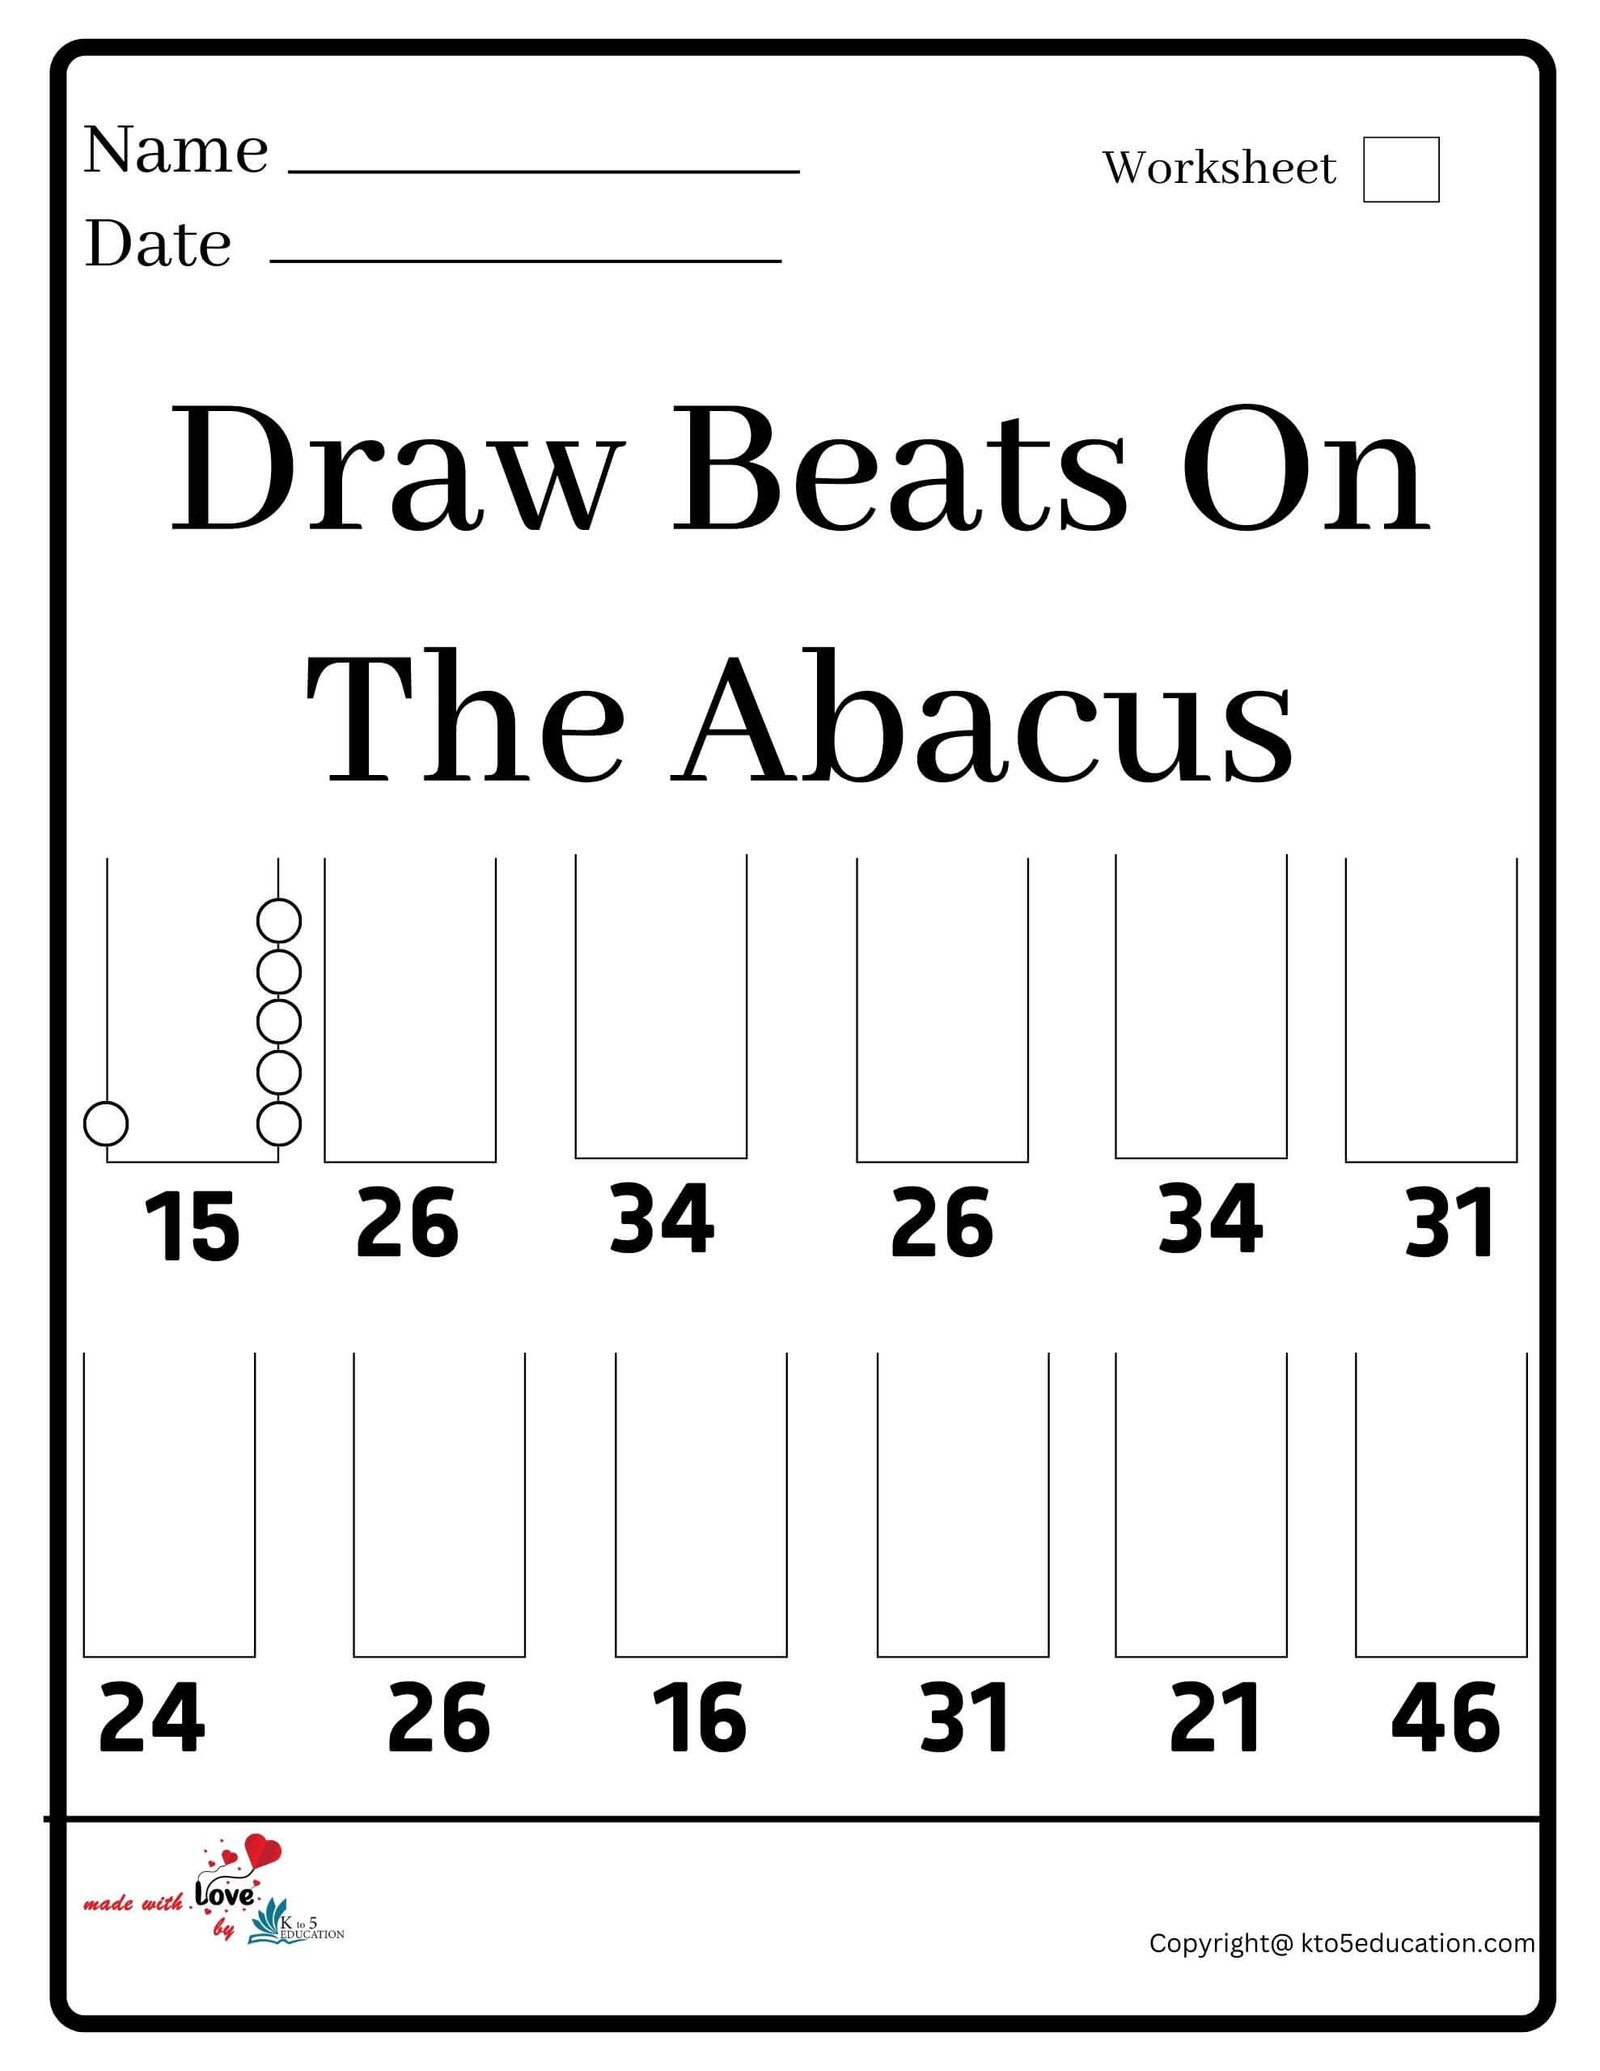 Draw Beats On The Abacus Worksheet